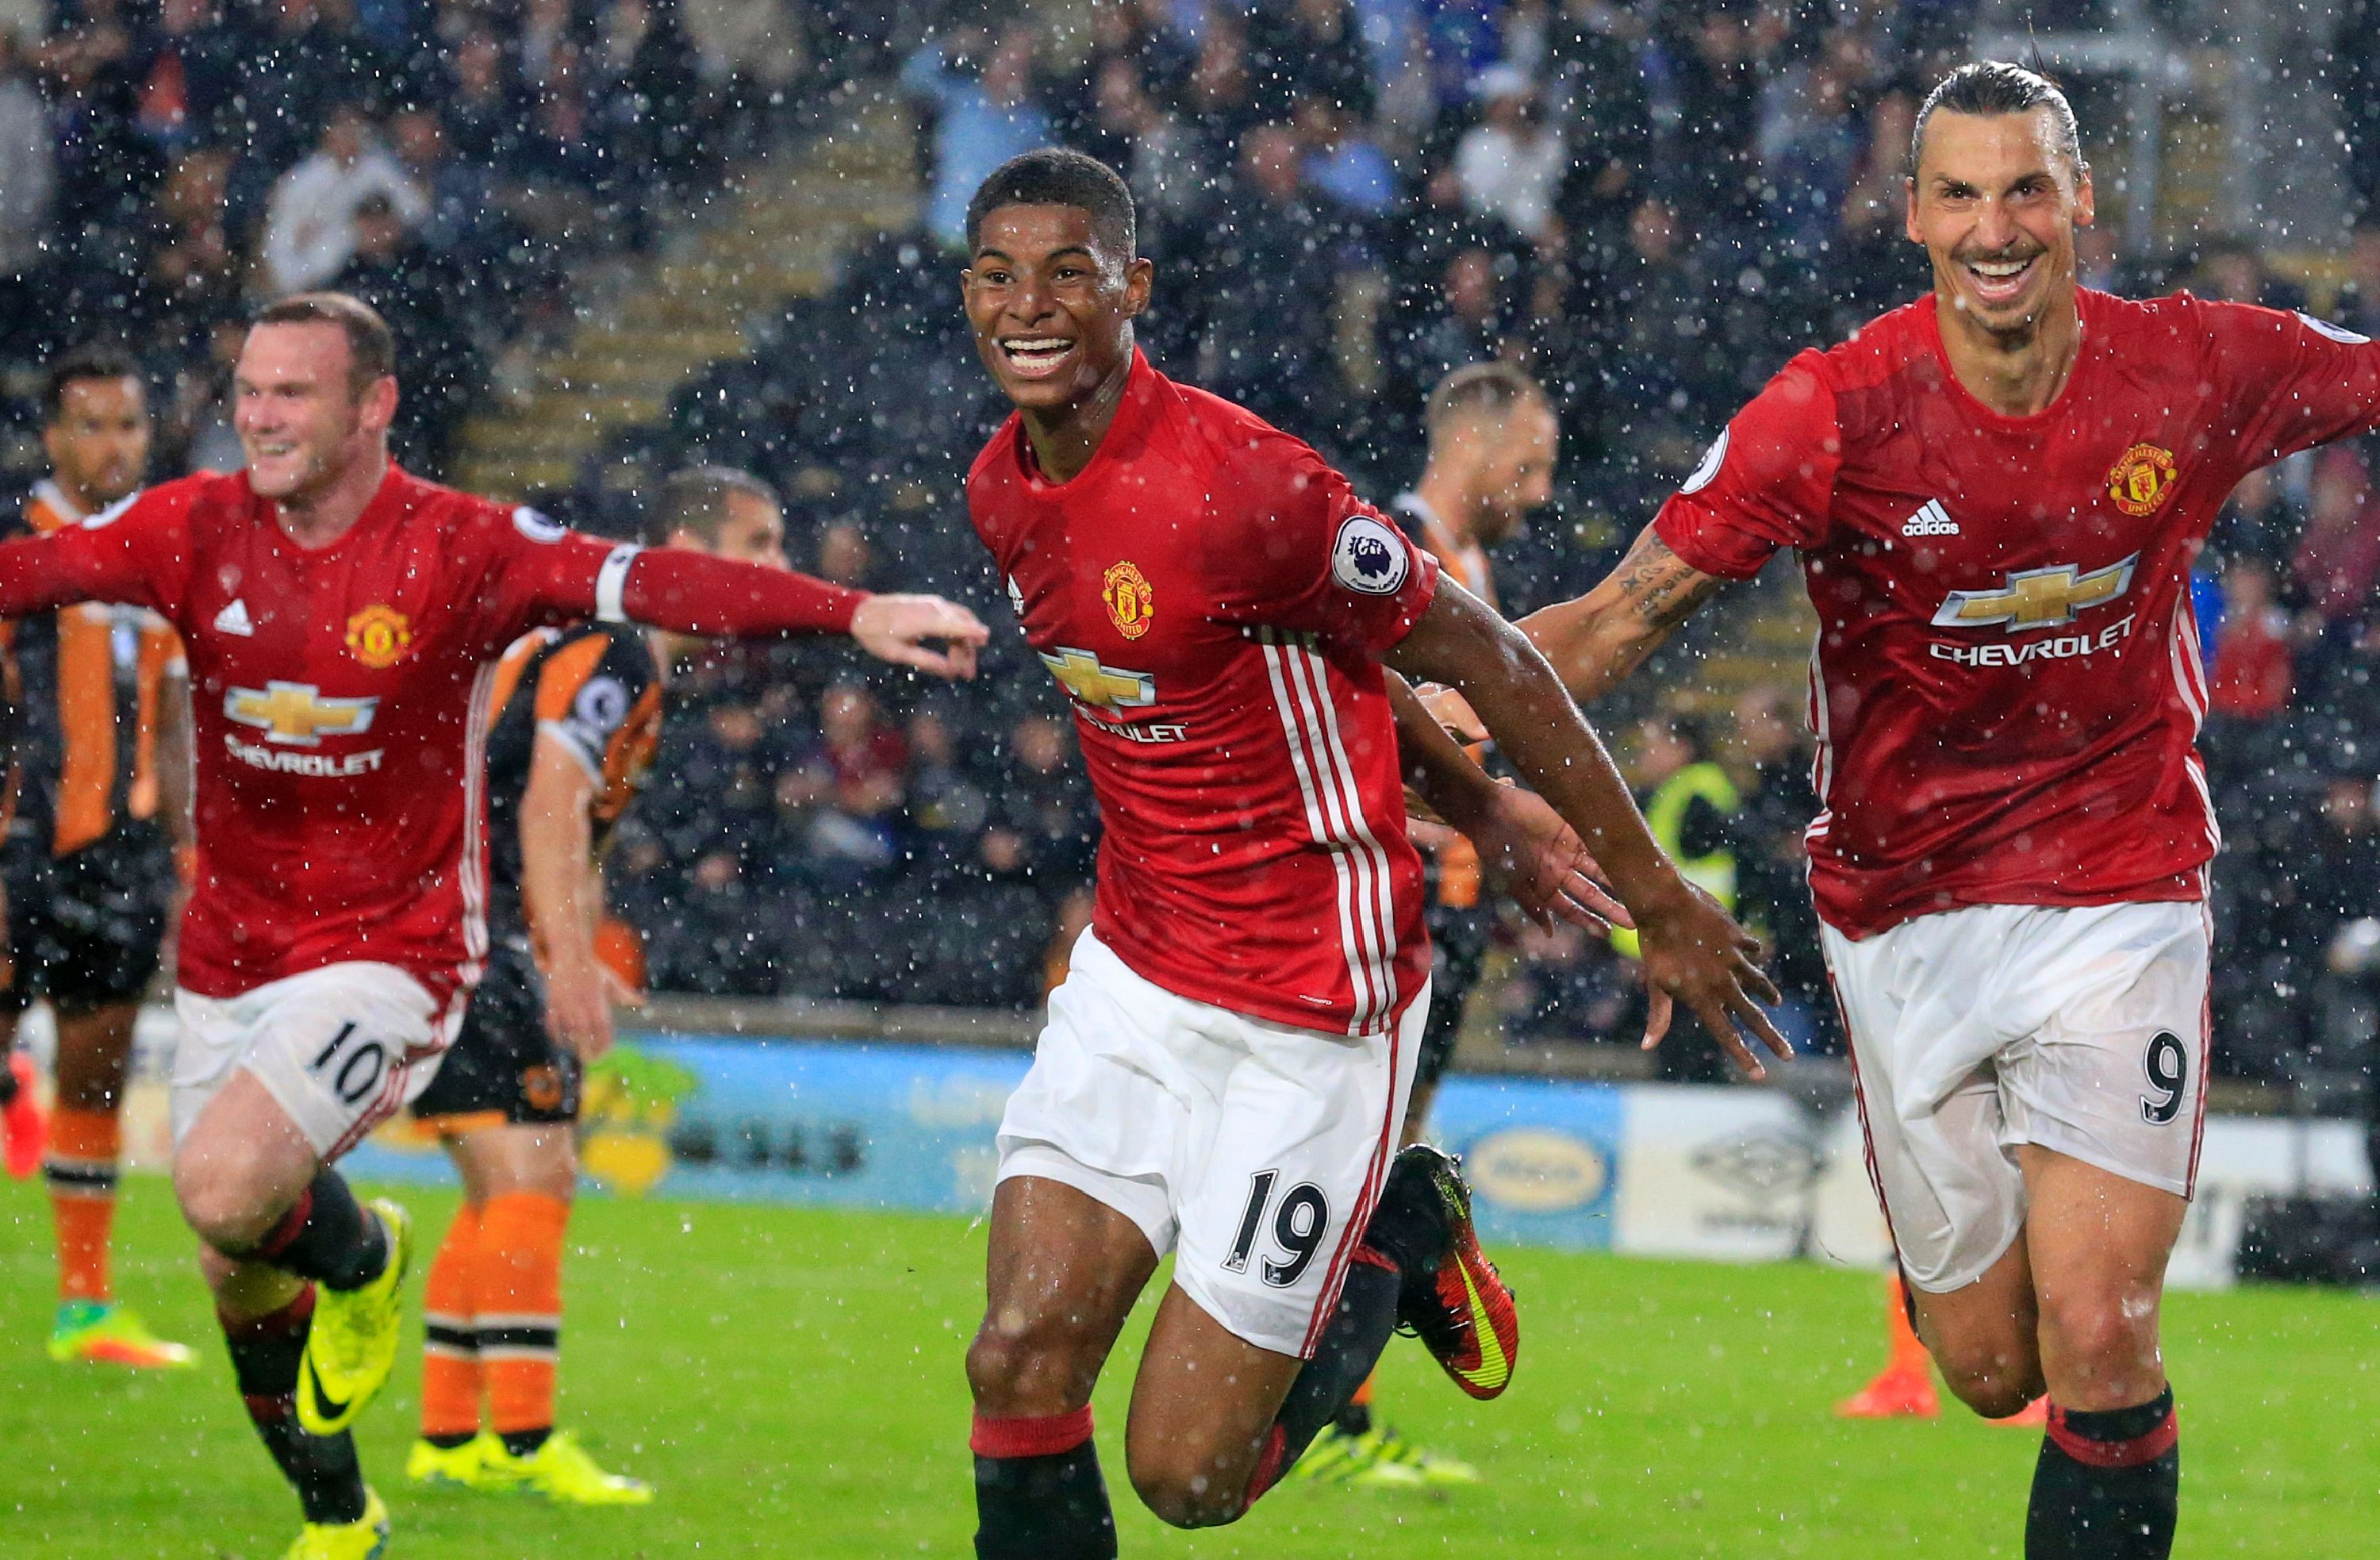 A perfect blend of youth and experience, the duo of Rashford and Zlatan is likely to be the key pillars of United's success against Chelsea on Sunday. (Picture Courtesy - AFP/Getty Images)